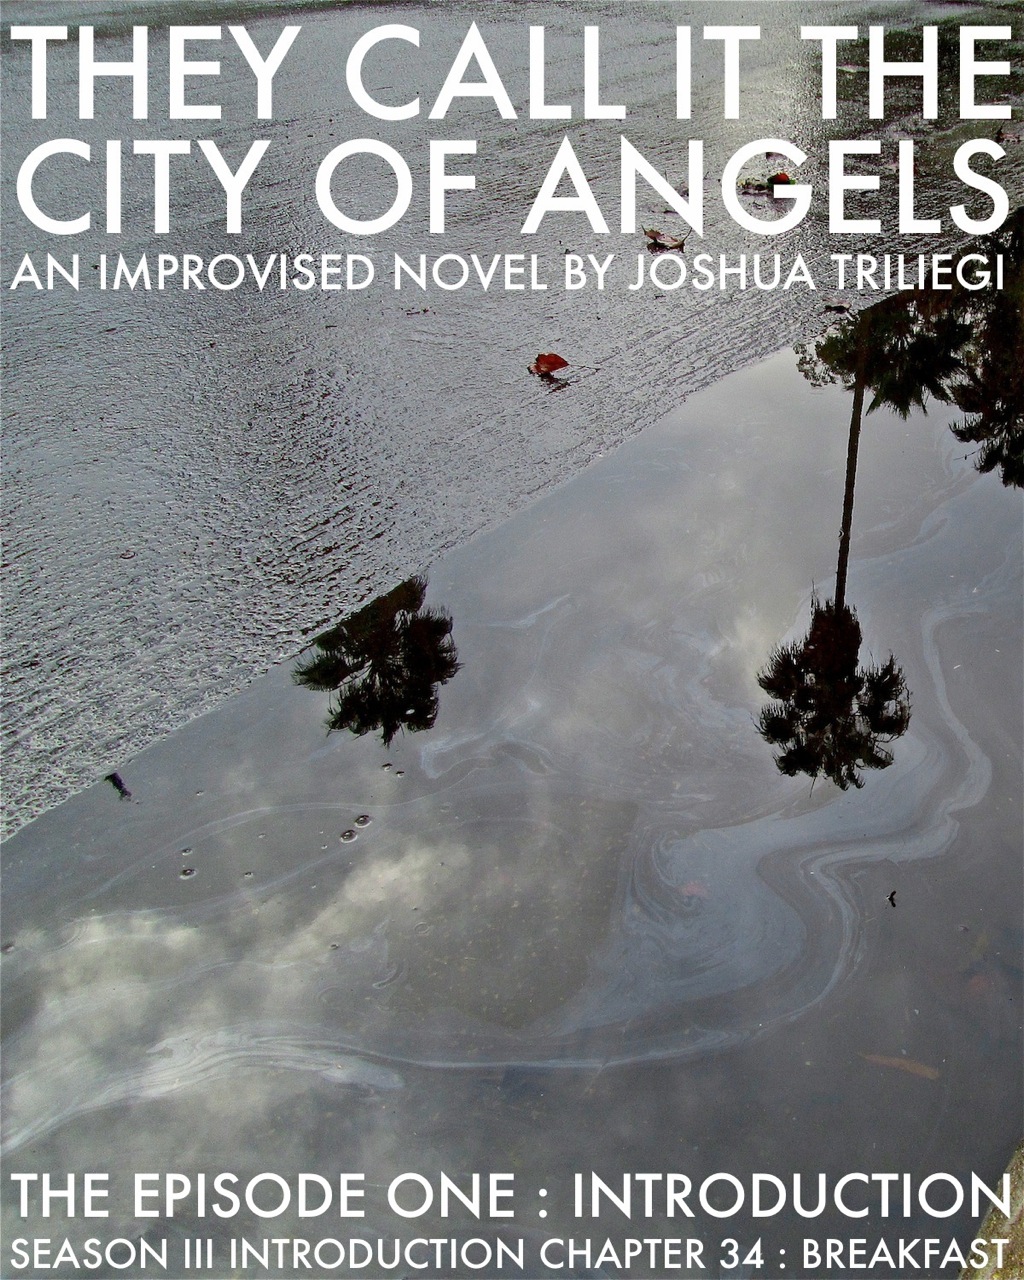 READ EPISODE ONE: THEY CALL IT THE CITY OF ANGELS SEASON III